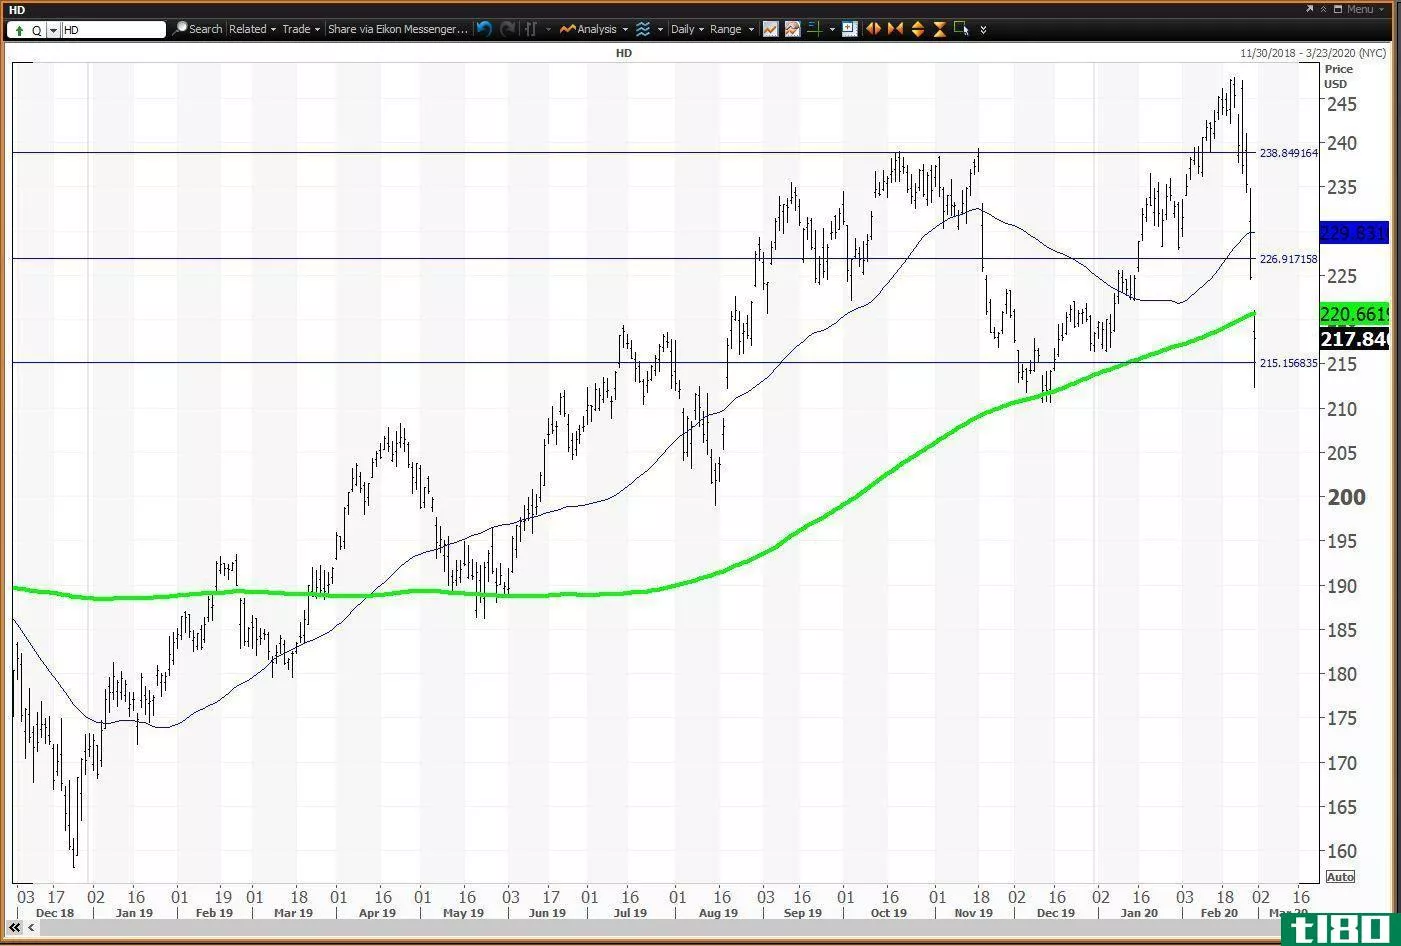 Daily chart showing the share price performance of The Home Depot, Inc. (HD)